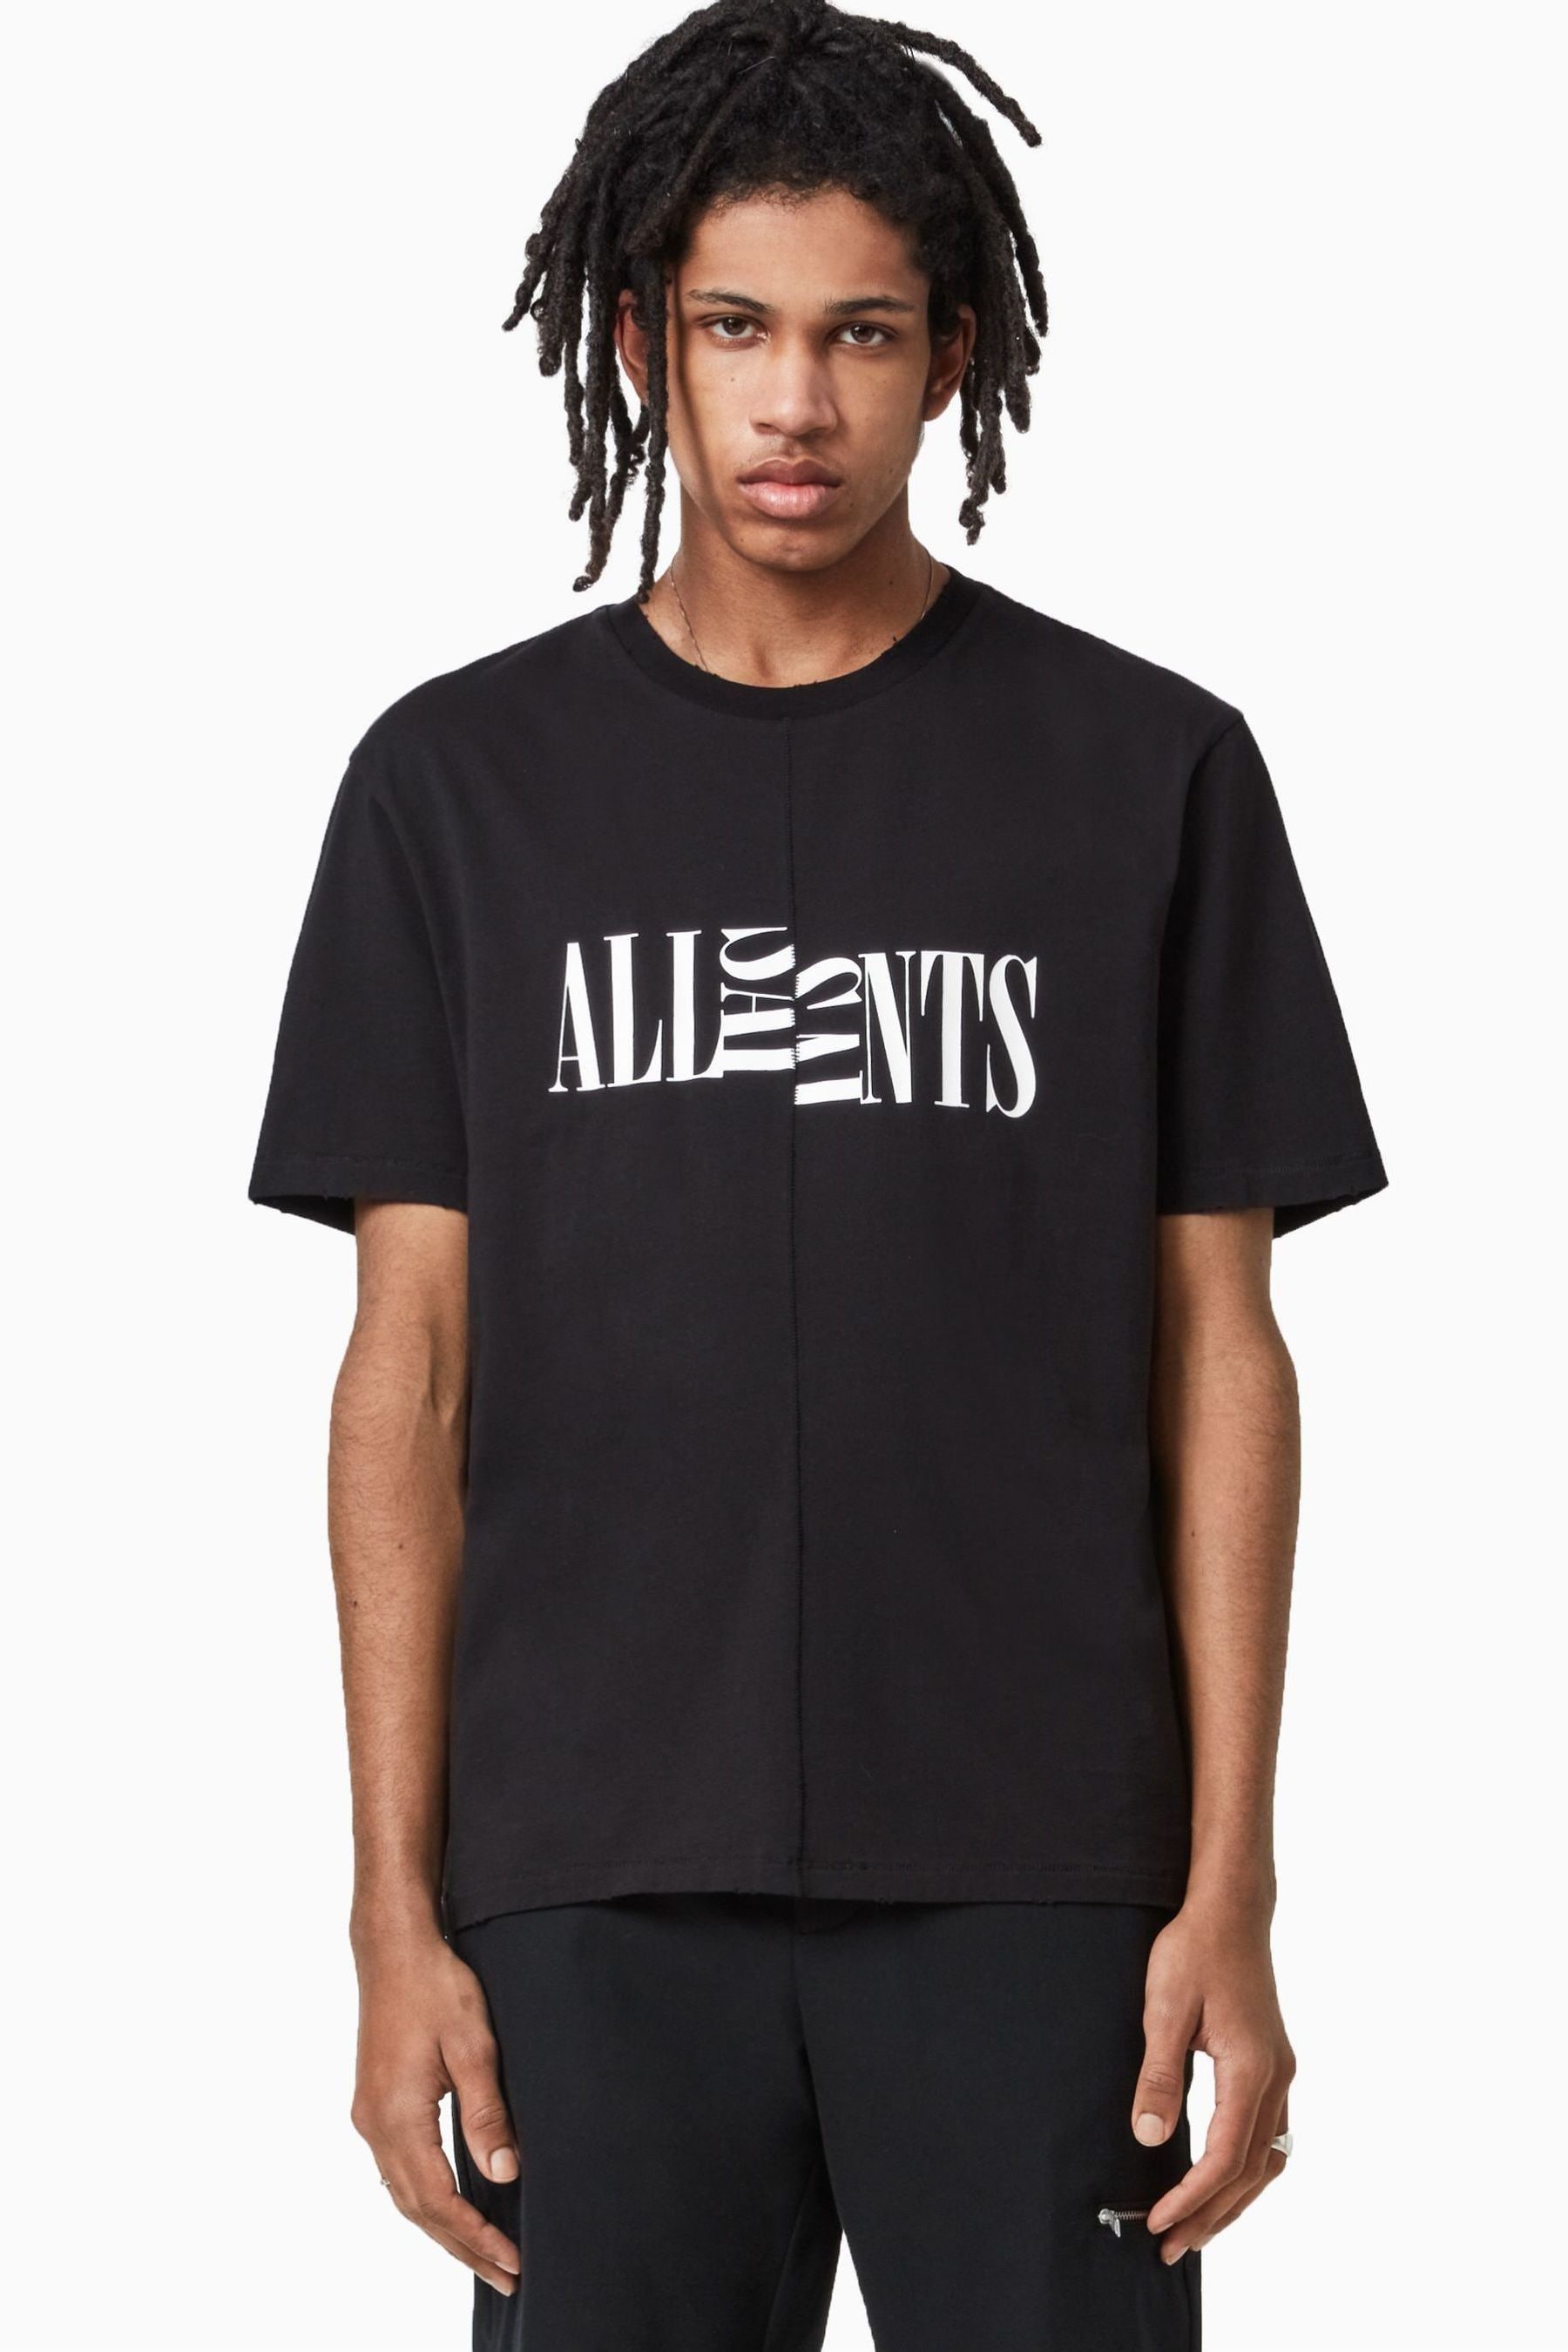 Buy AllSaints Black Nico Ss Crew T-Shirt from the Next UK online shop